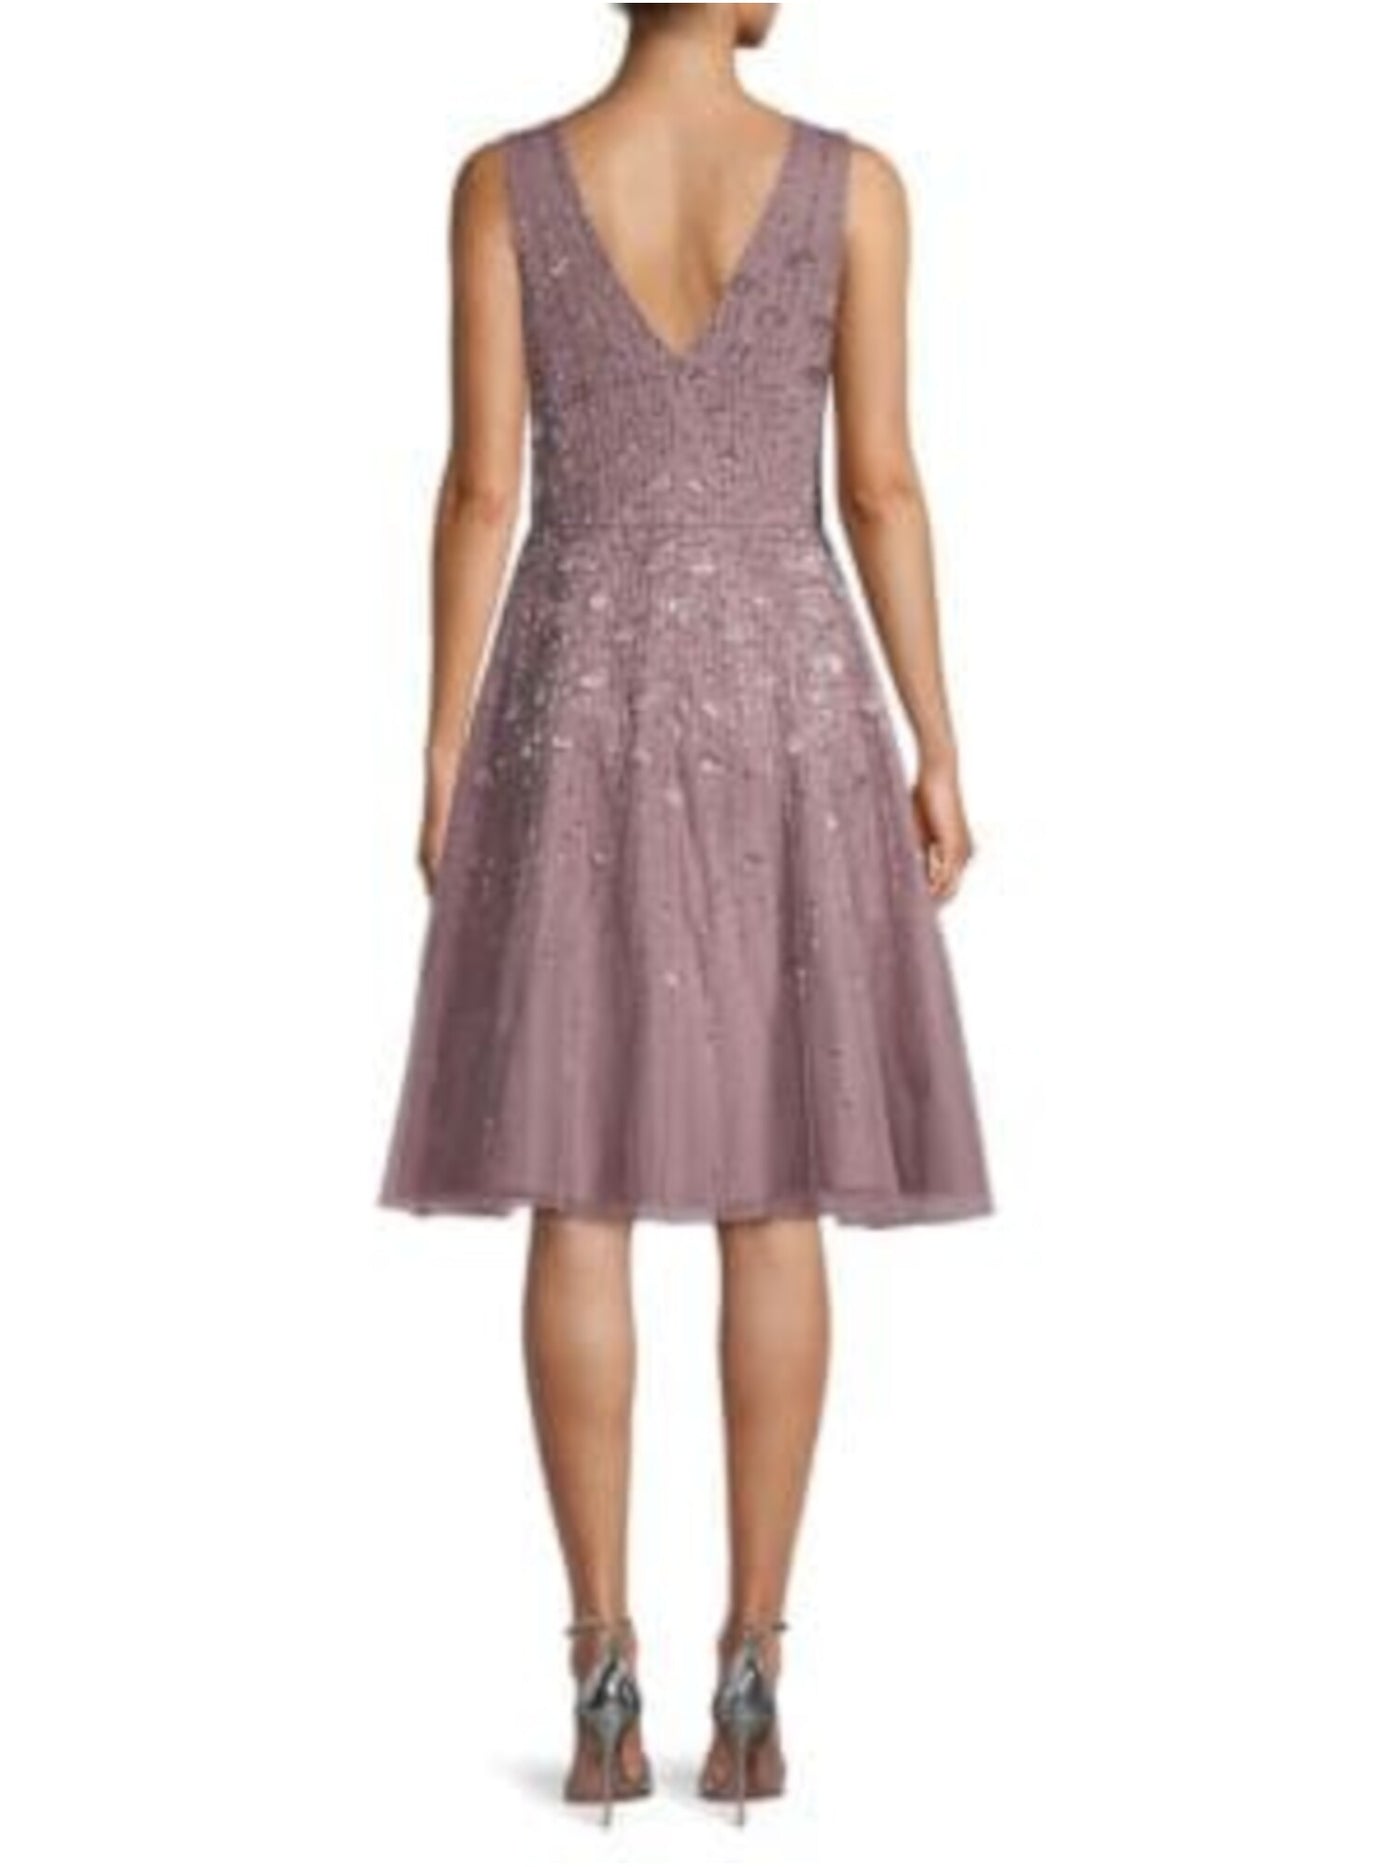 AIDAN MATTOX Womens Purple Embellished Sequined Sleeveless V Neck Knee Length Cocktail Fit + Flare Dress 4